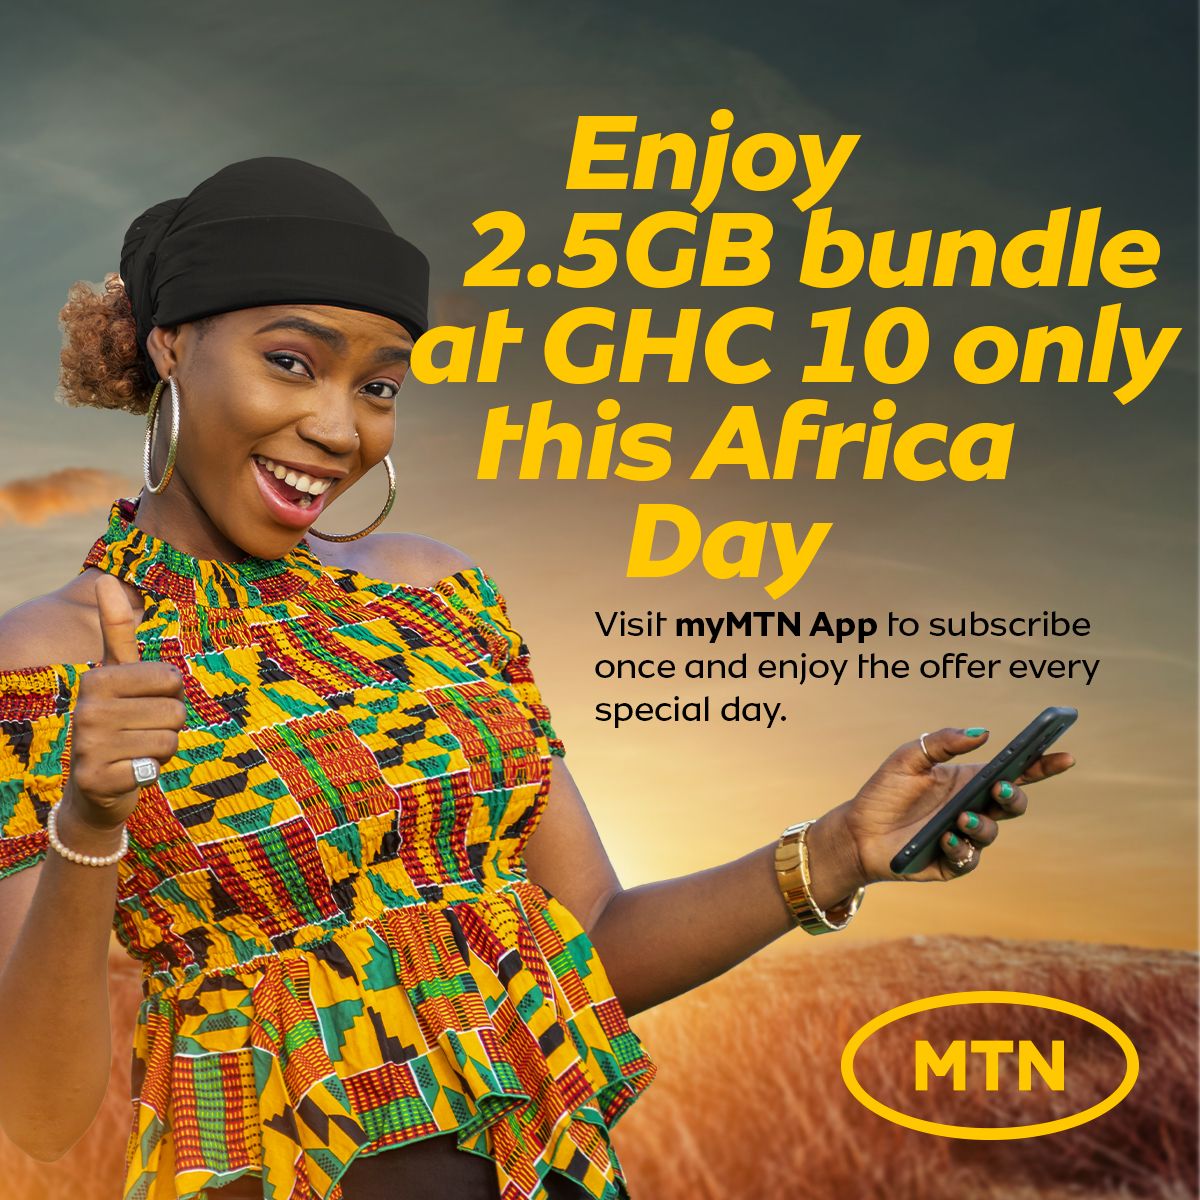 We have a special offer for you on a special day like AU Day! Get 2.5GB bundle at GHS 10 only this Africa Day. Visit myMTN app to subscribe and enjoy the offer every special day.